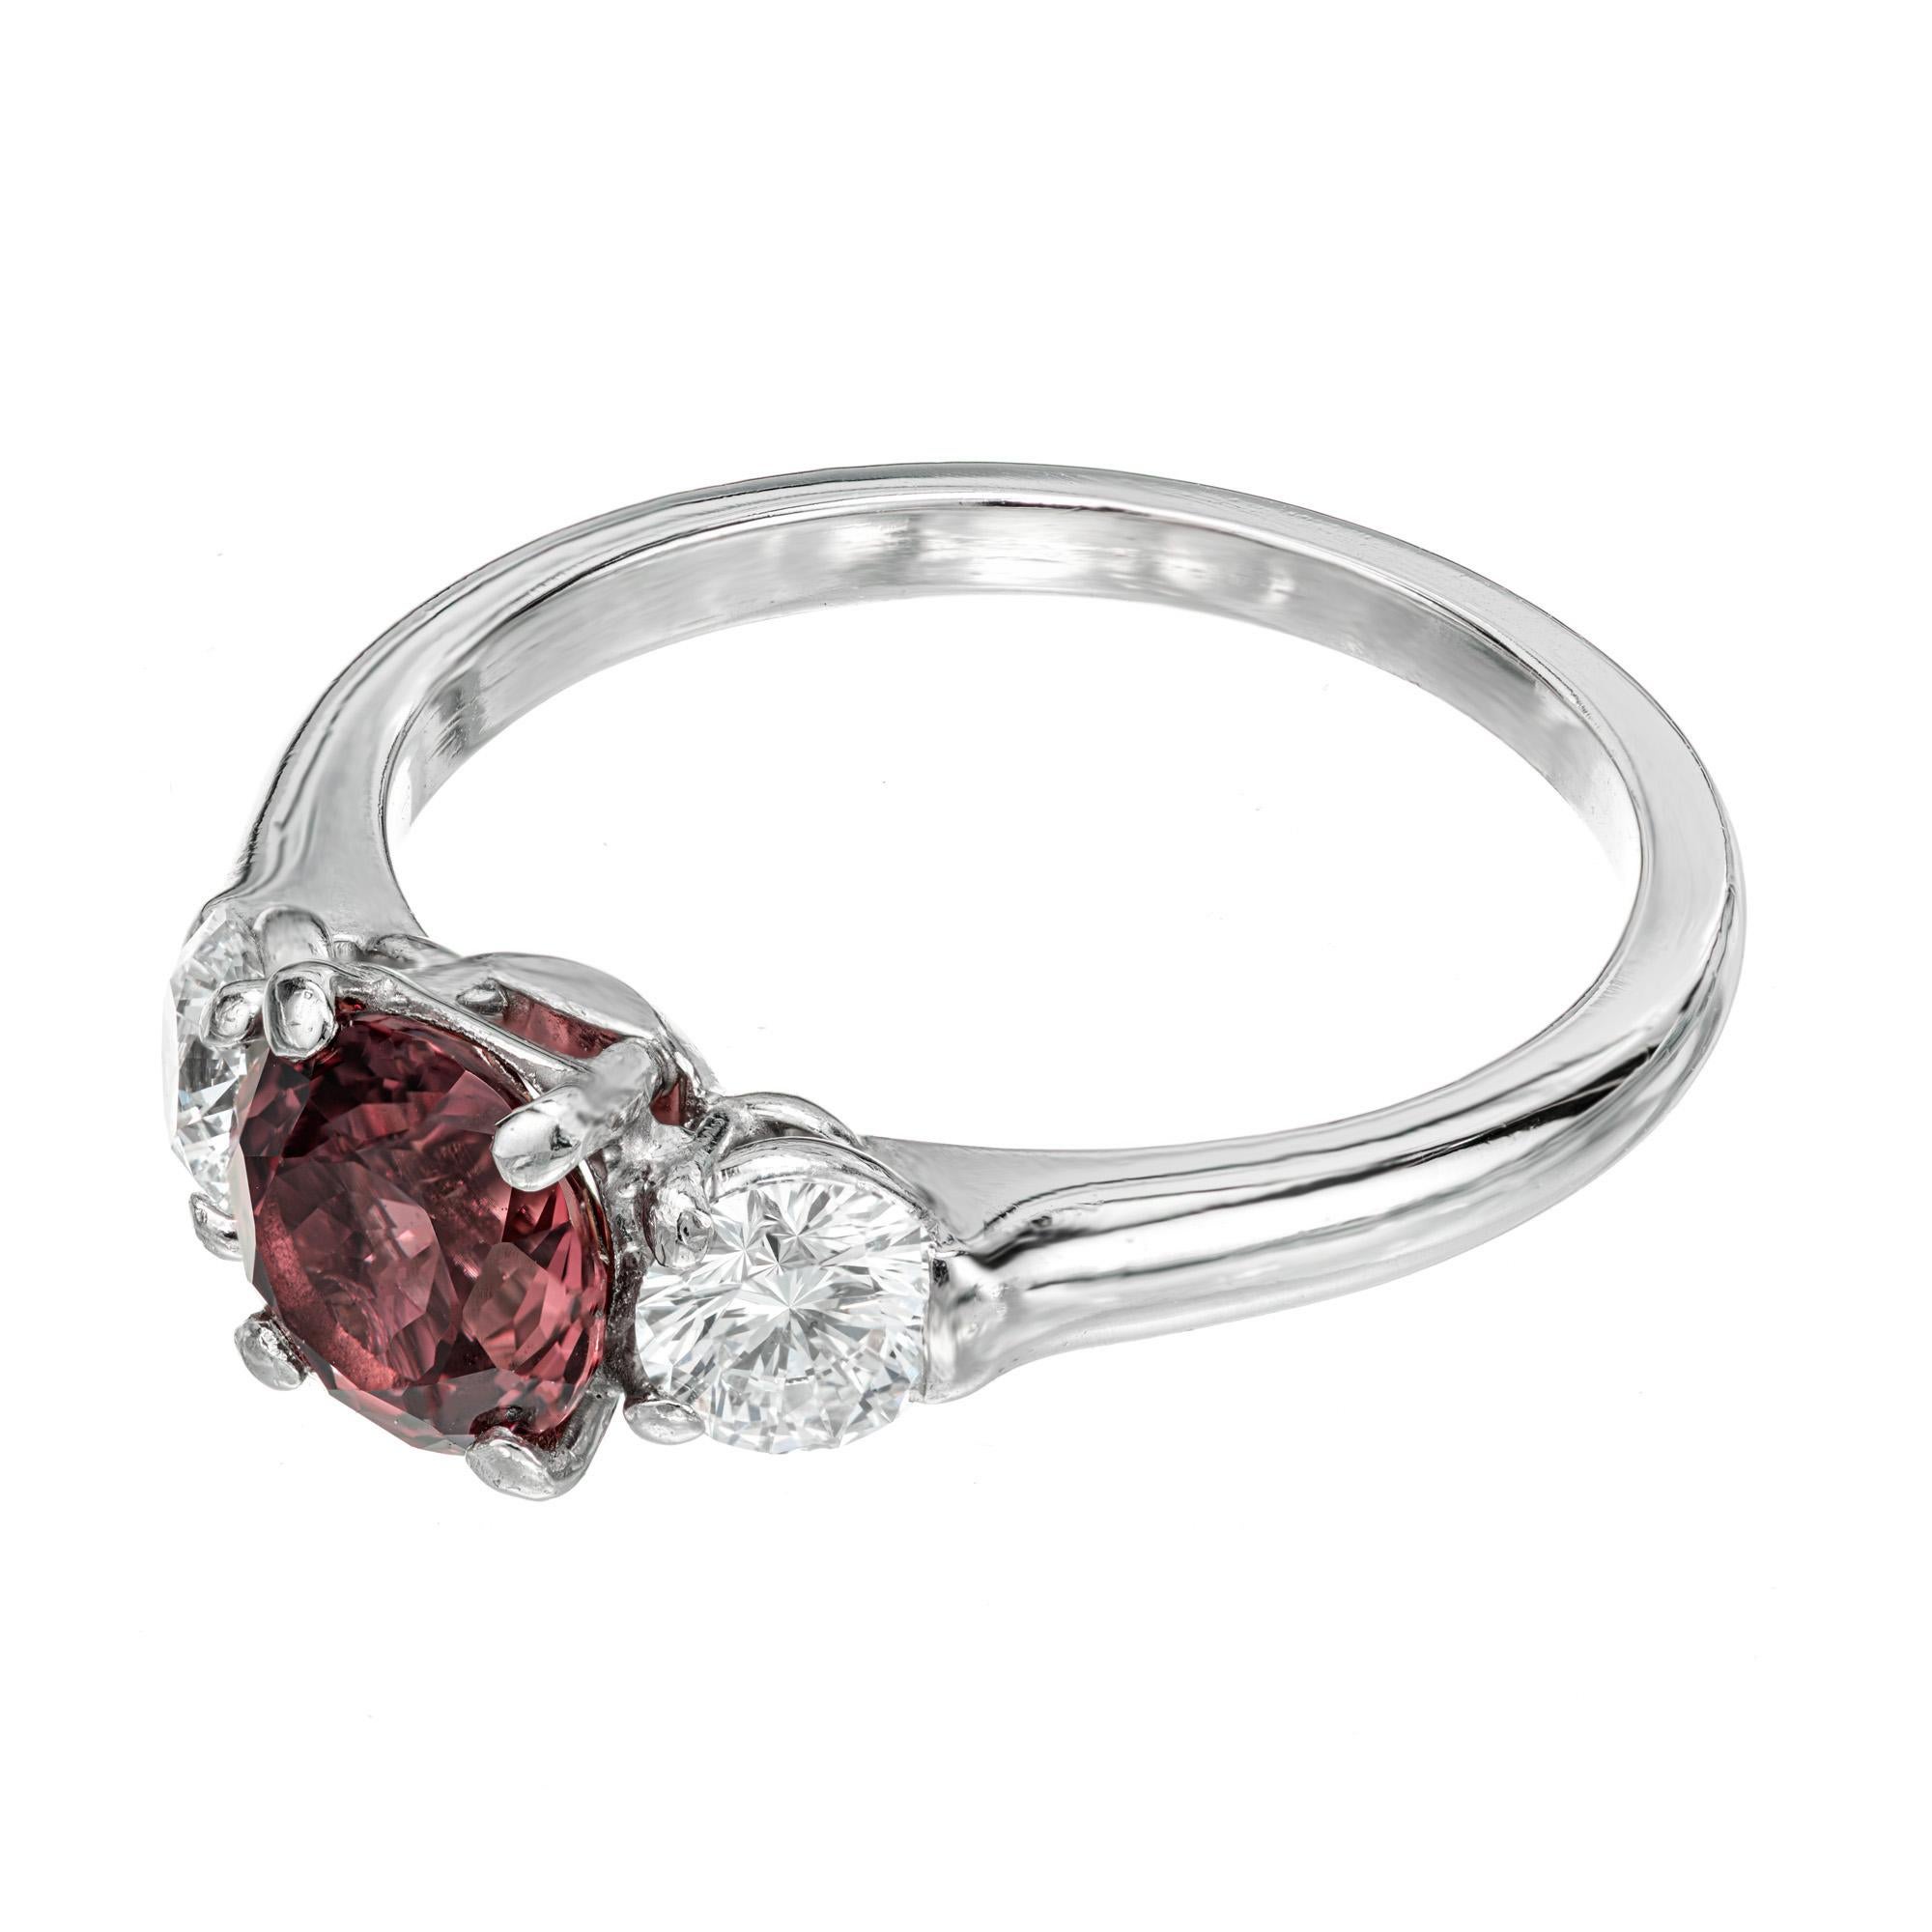 Sapphire and diamond engagement ring. GIA certified center brown and red center sapphire with 2 ideal cut side diamonds in a three-stone platinum setting. Color natural no heat, no enhancement Sapphire. Unique Raspberry color shifts to make pink is